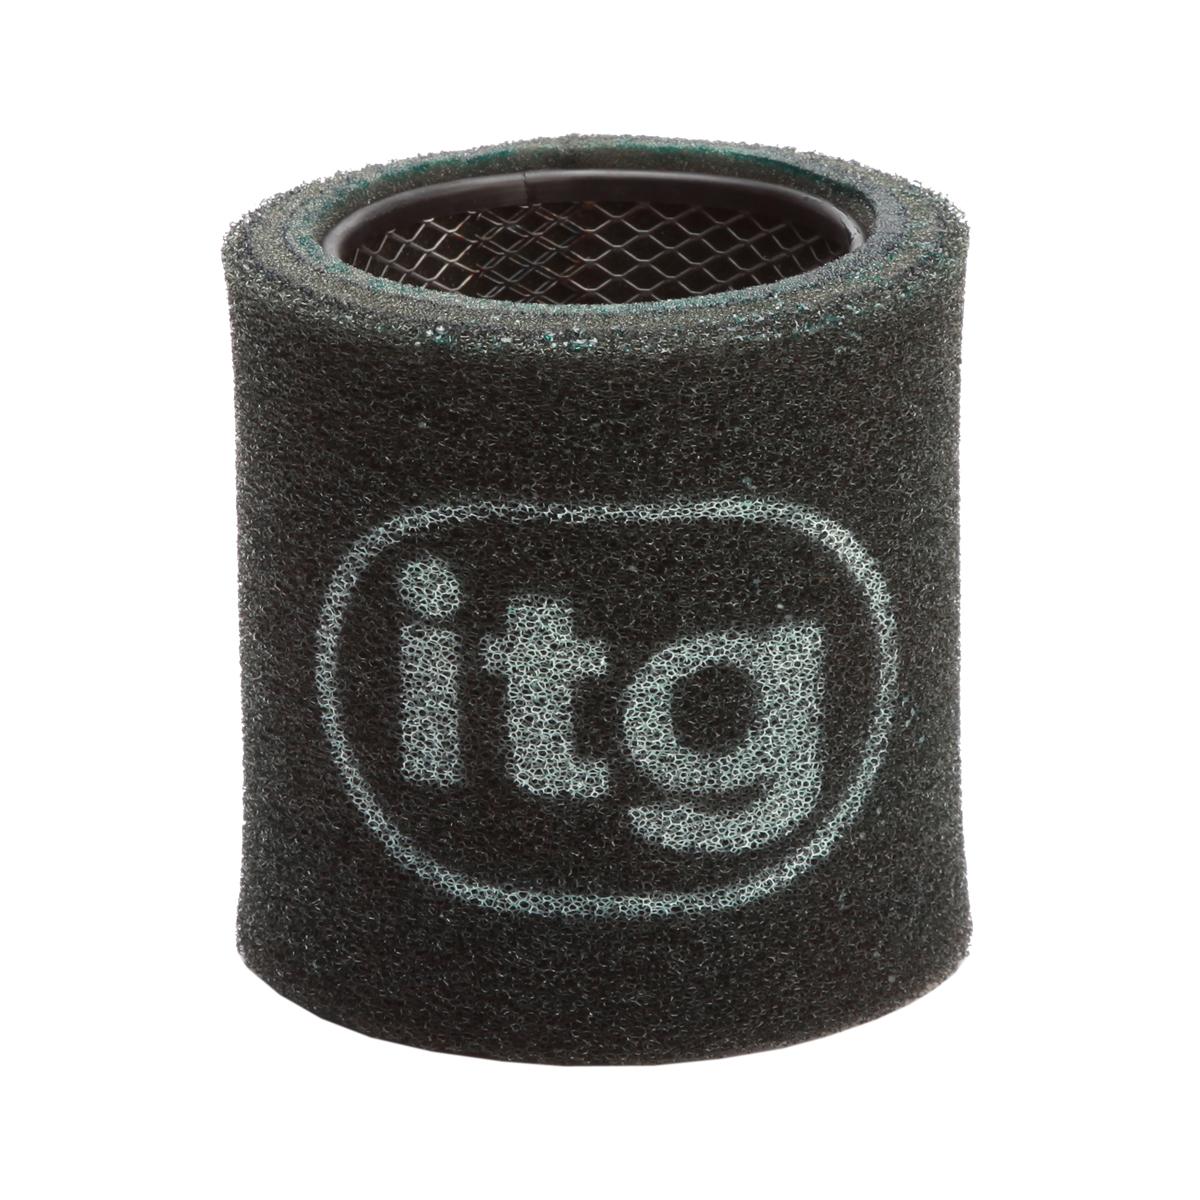 ITG Air Filter For Renault R21 1.7L (1989>)